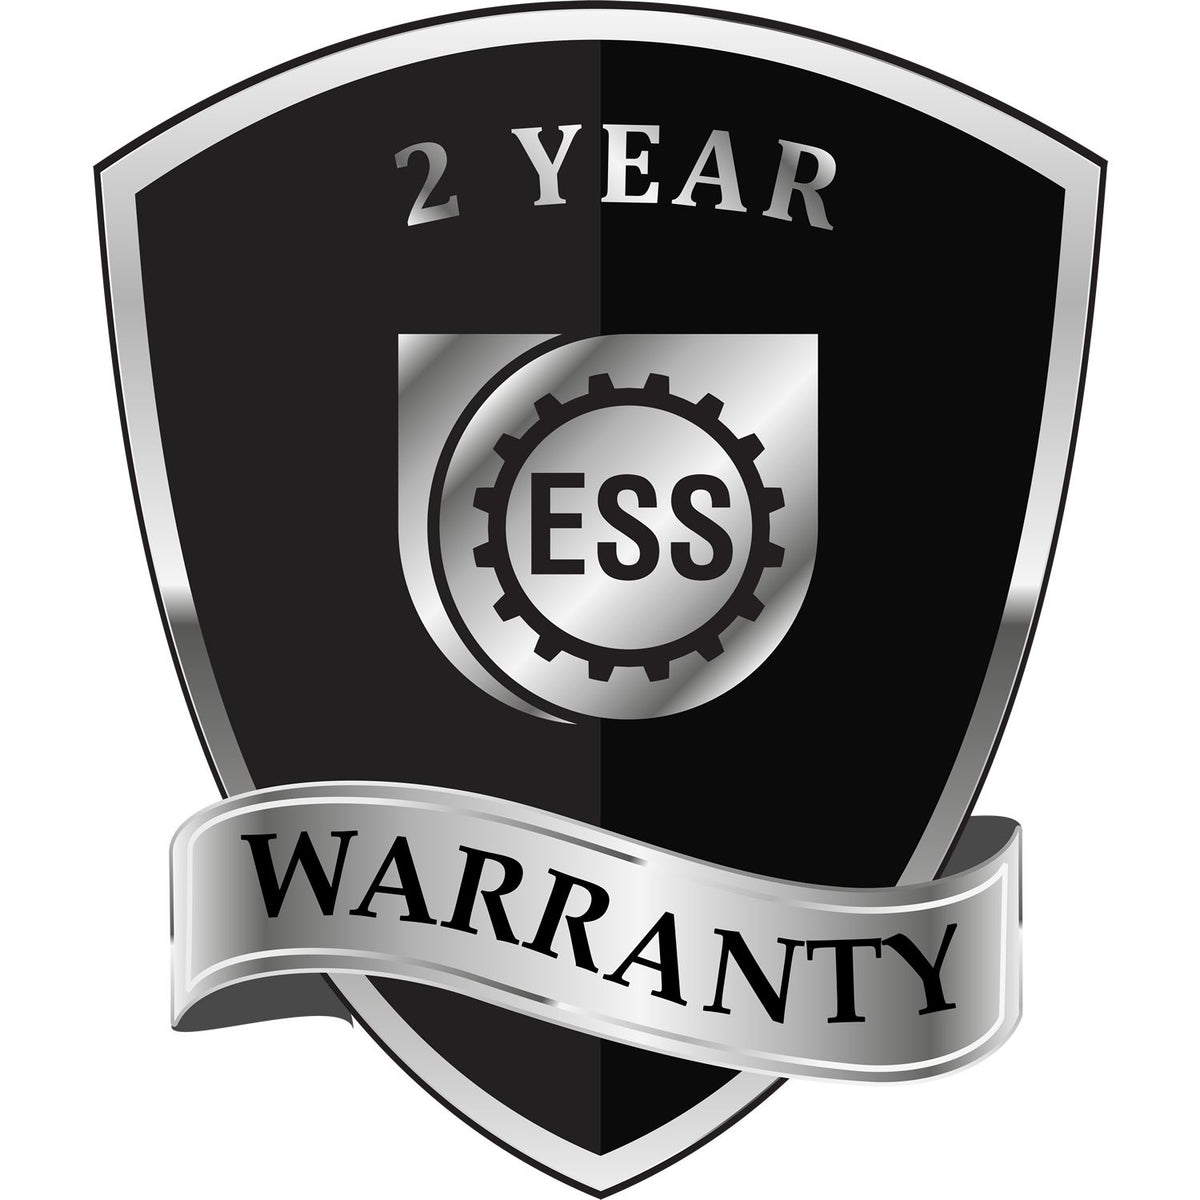 A black and silver badge or emblem showing warranty information for the Gift Ohio Geologist Seal